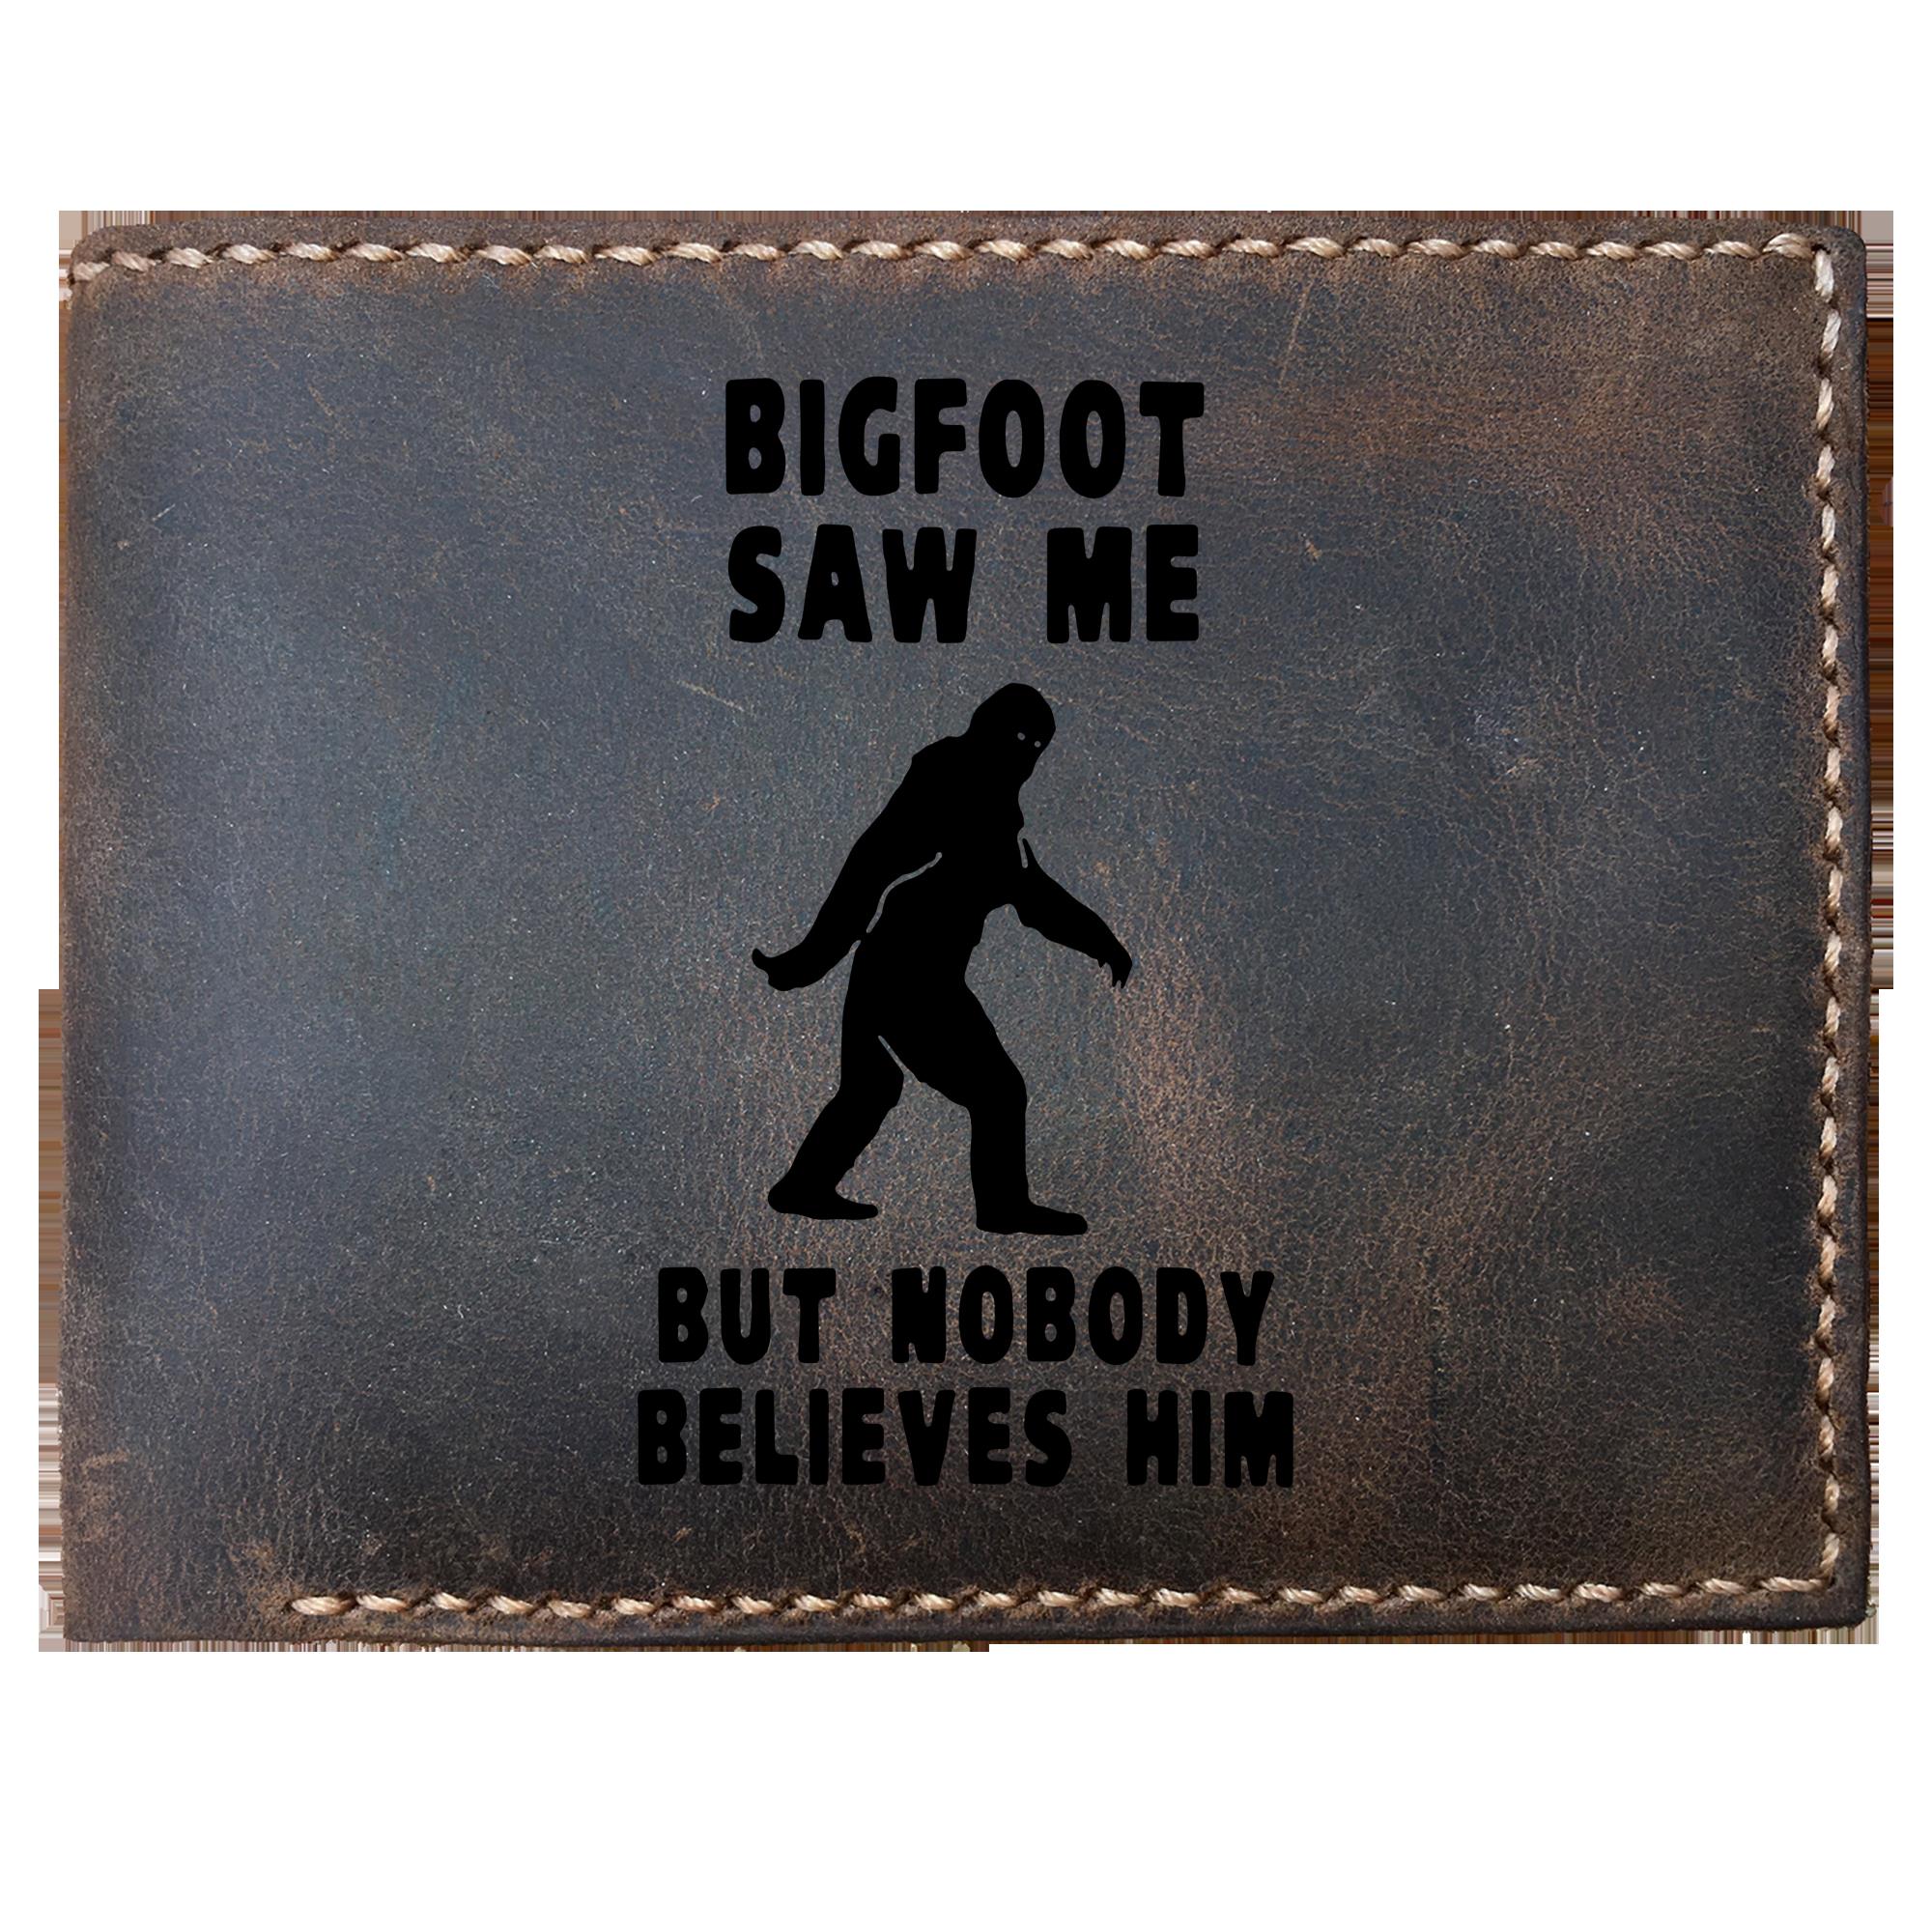 Skitongifts Funny Custom Laser Engraved Bifold Leather Wallet For Men, Bigfoot Saw Me But Nobody Believes Him